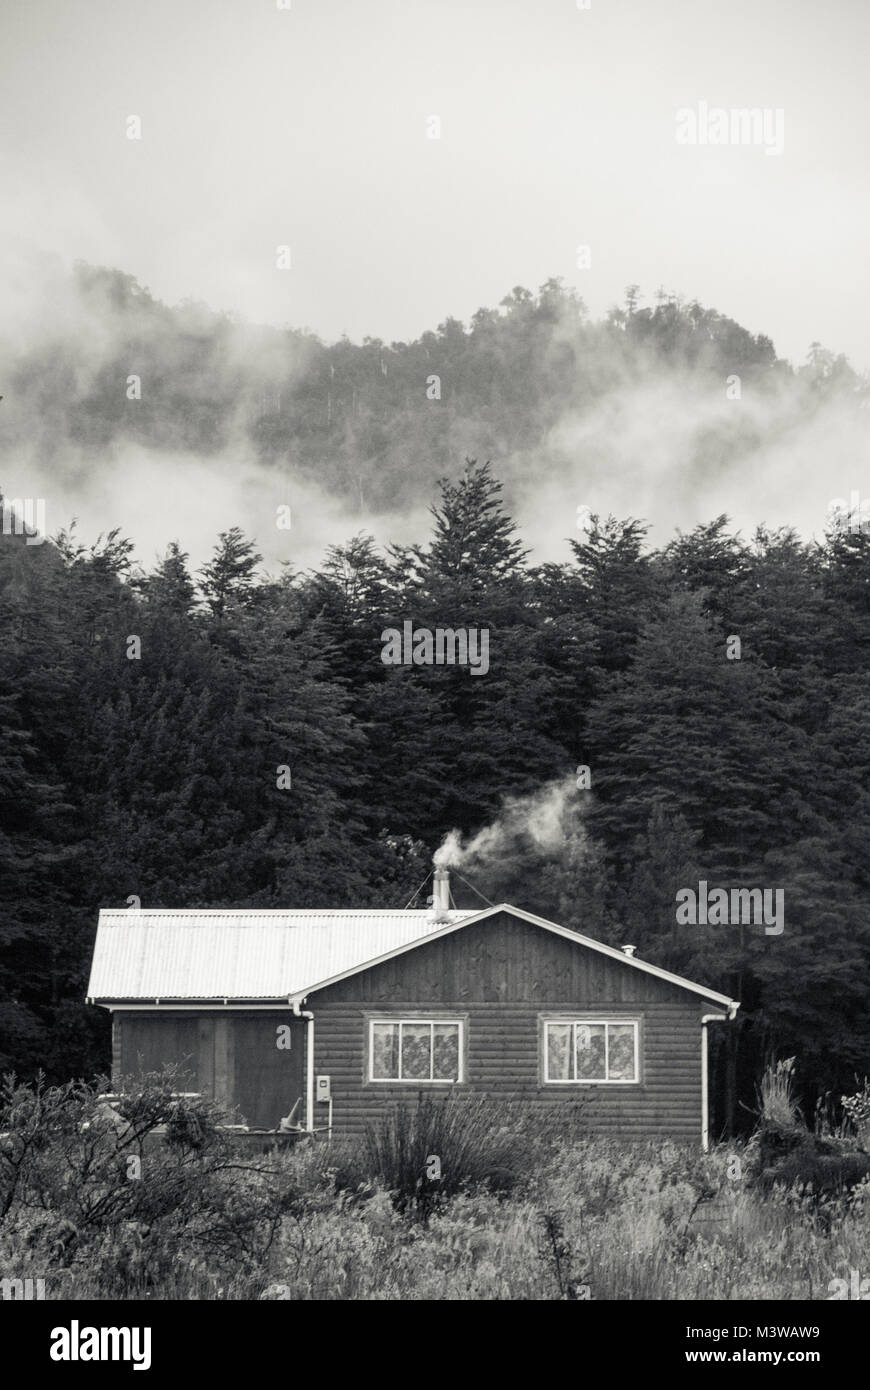 A wooden house with smoke coming from the chimney against a misty forest background Stock Photo